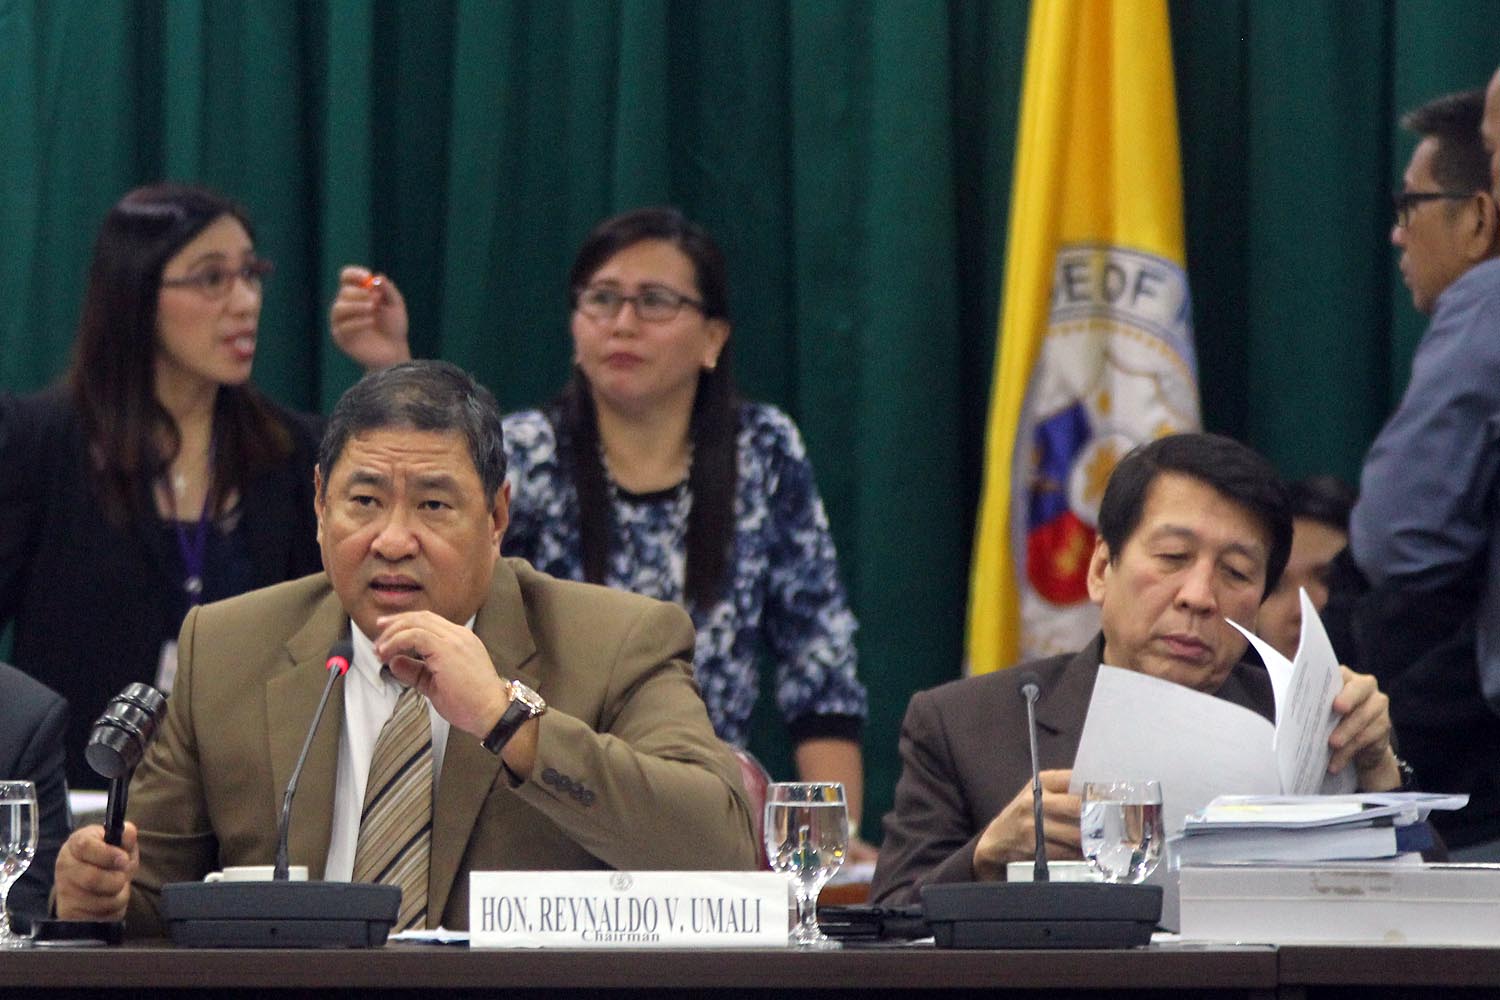 IMPEACHMENT CASE. Justice committee chairman Reynaldo Umali (center) presides the hearing on the determination of sufficiency of the grounds in the impeachment complaint against Chief Justice Maria Lourdes Sereno. Photo by Darren Langit/Rappler  